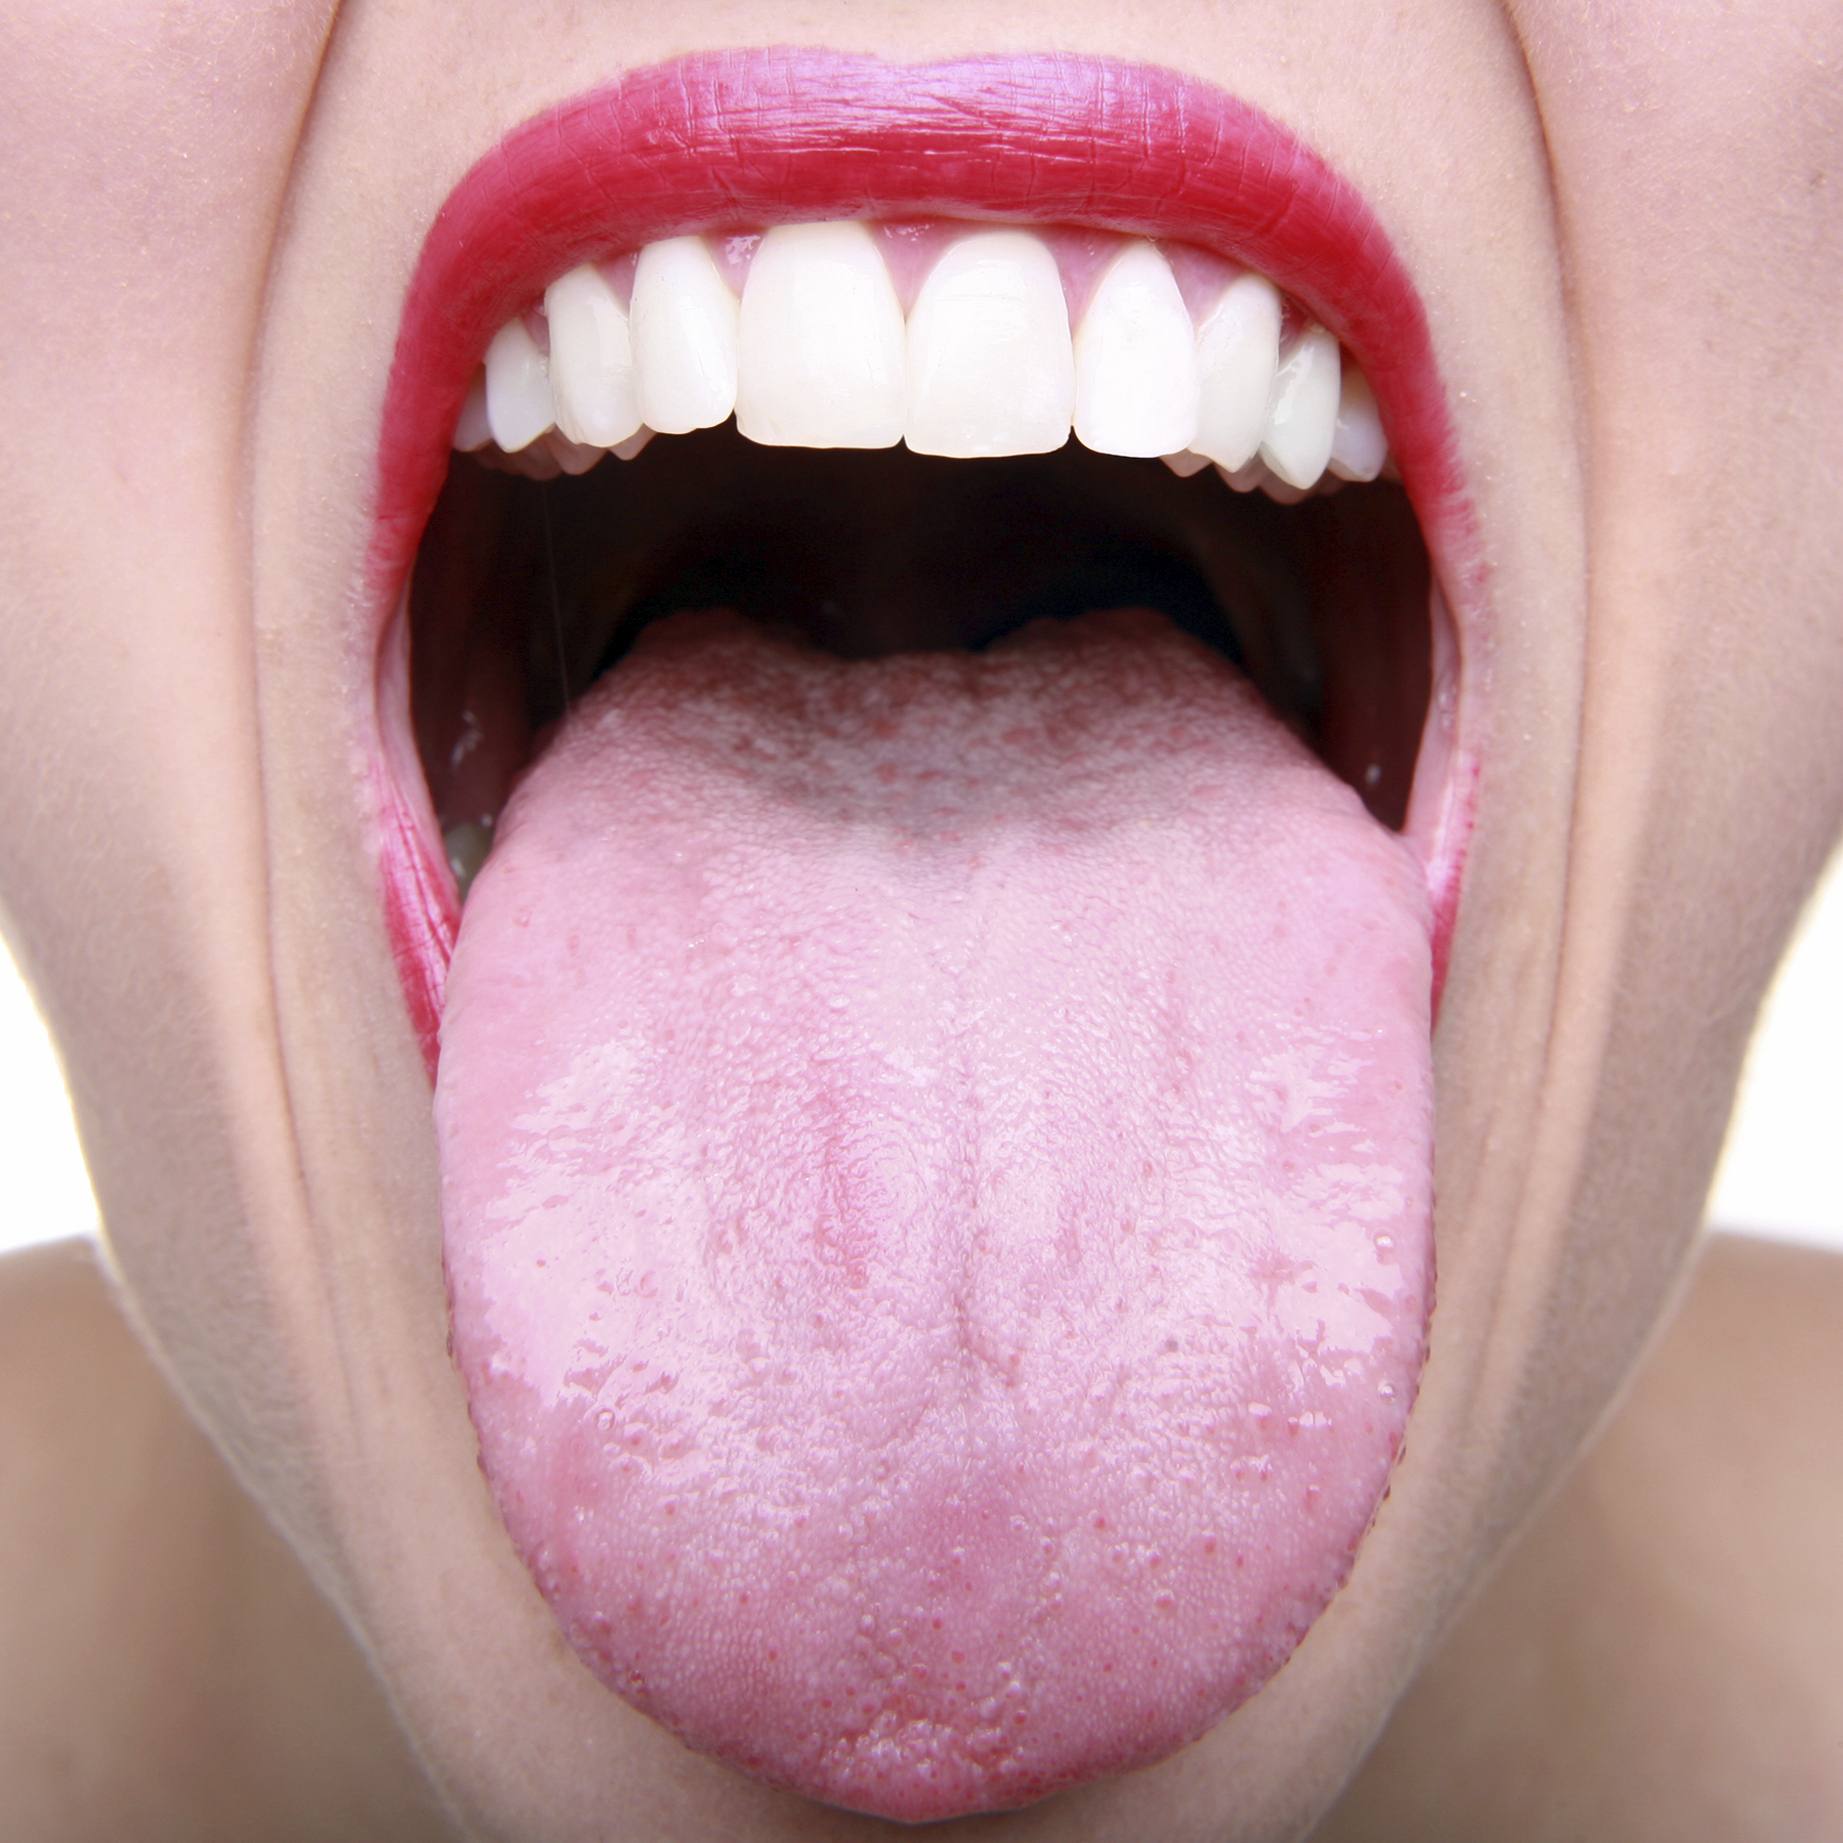 Where You Live May Determine What Lives Inside Your Mouth | NCPR News